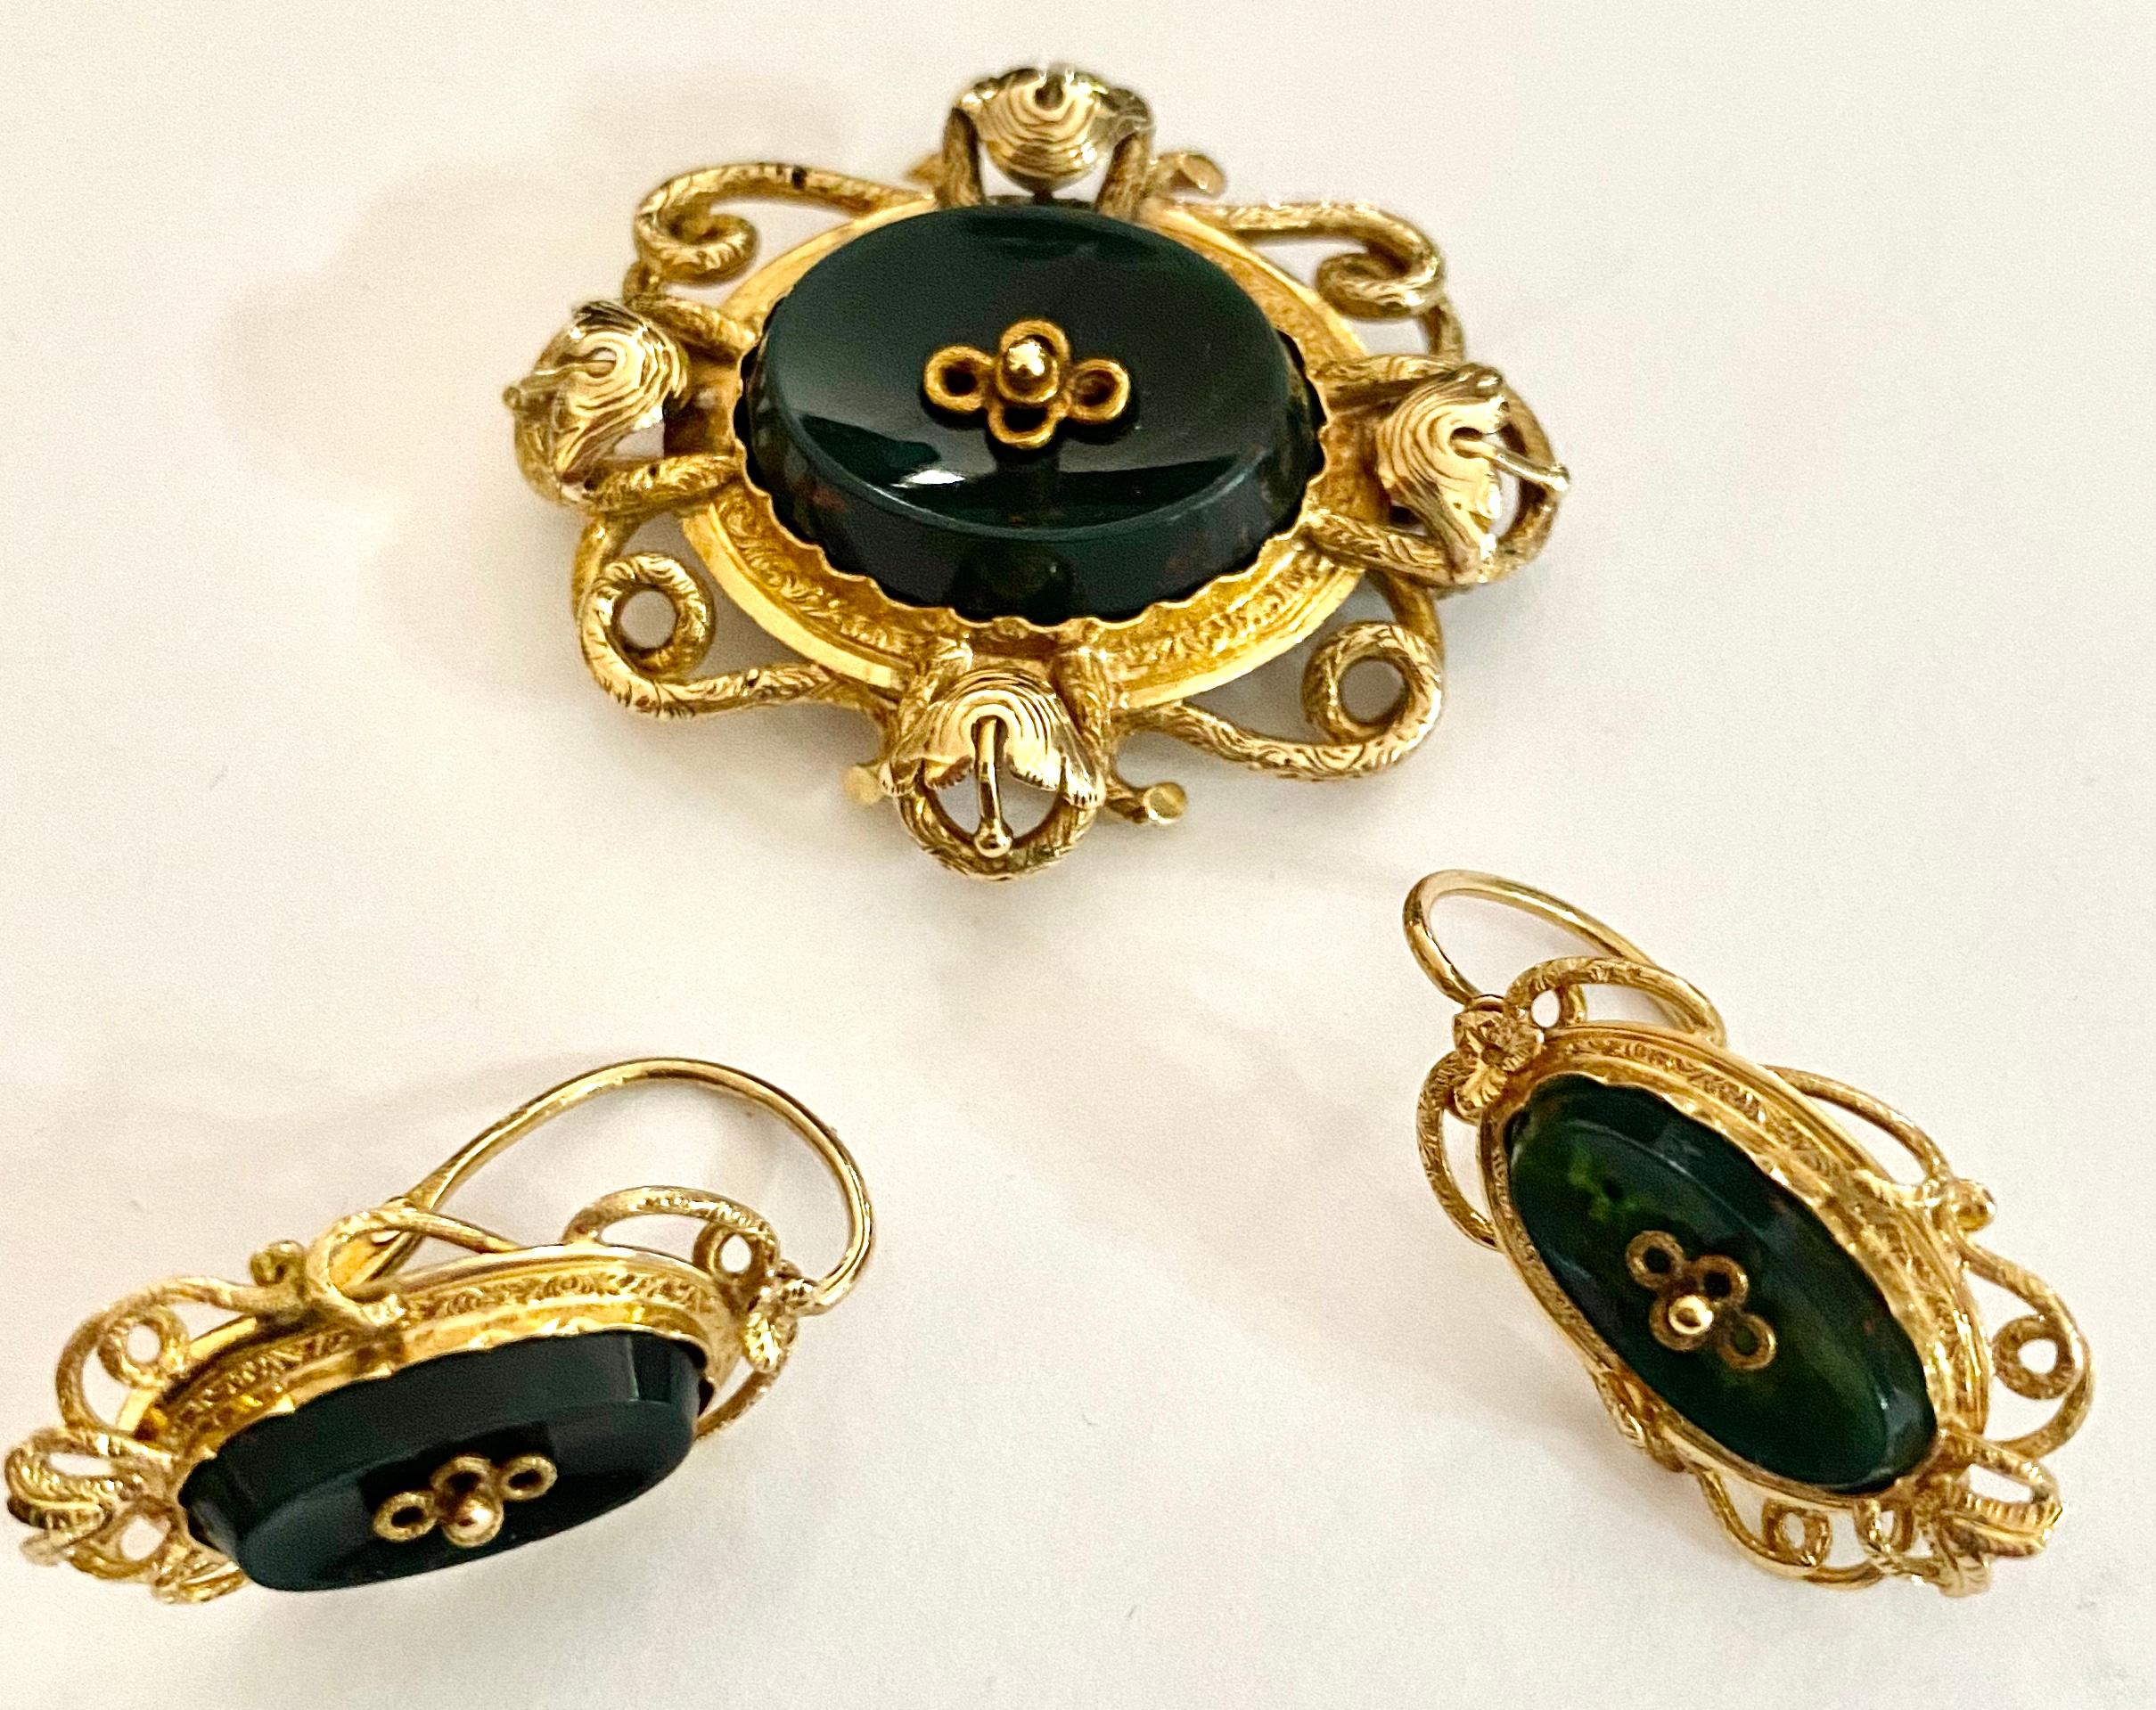 Cabochon Petit Parure, 18 Karat Yellow Gold Boche and Earrings, Brussels  1850 For Sale